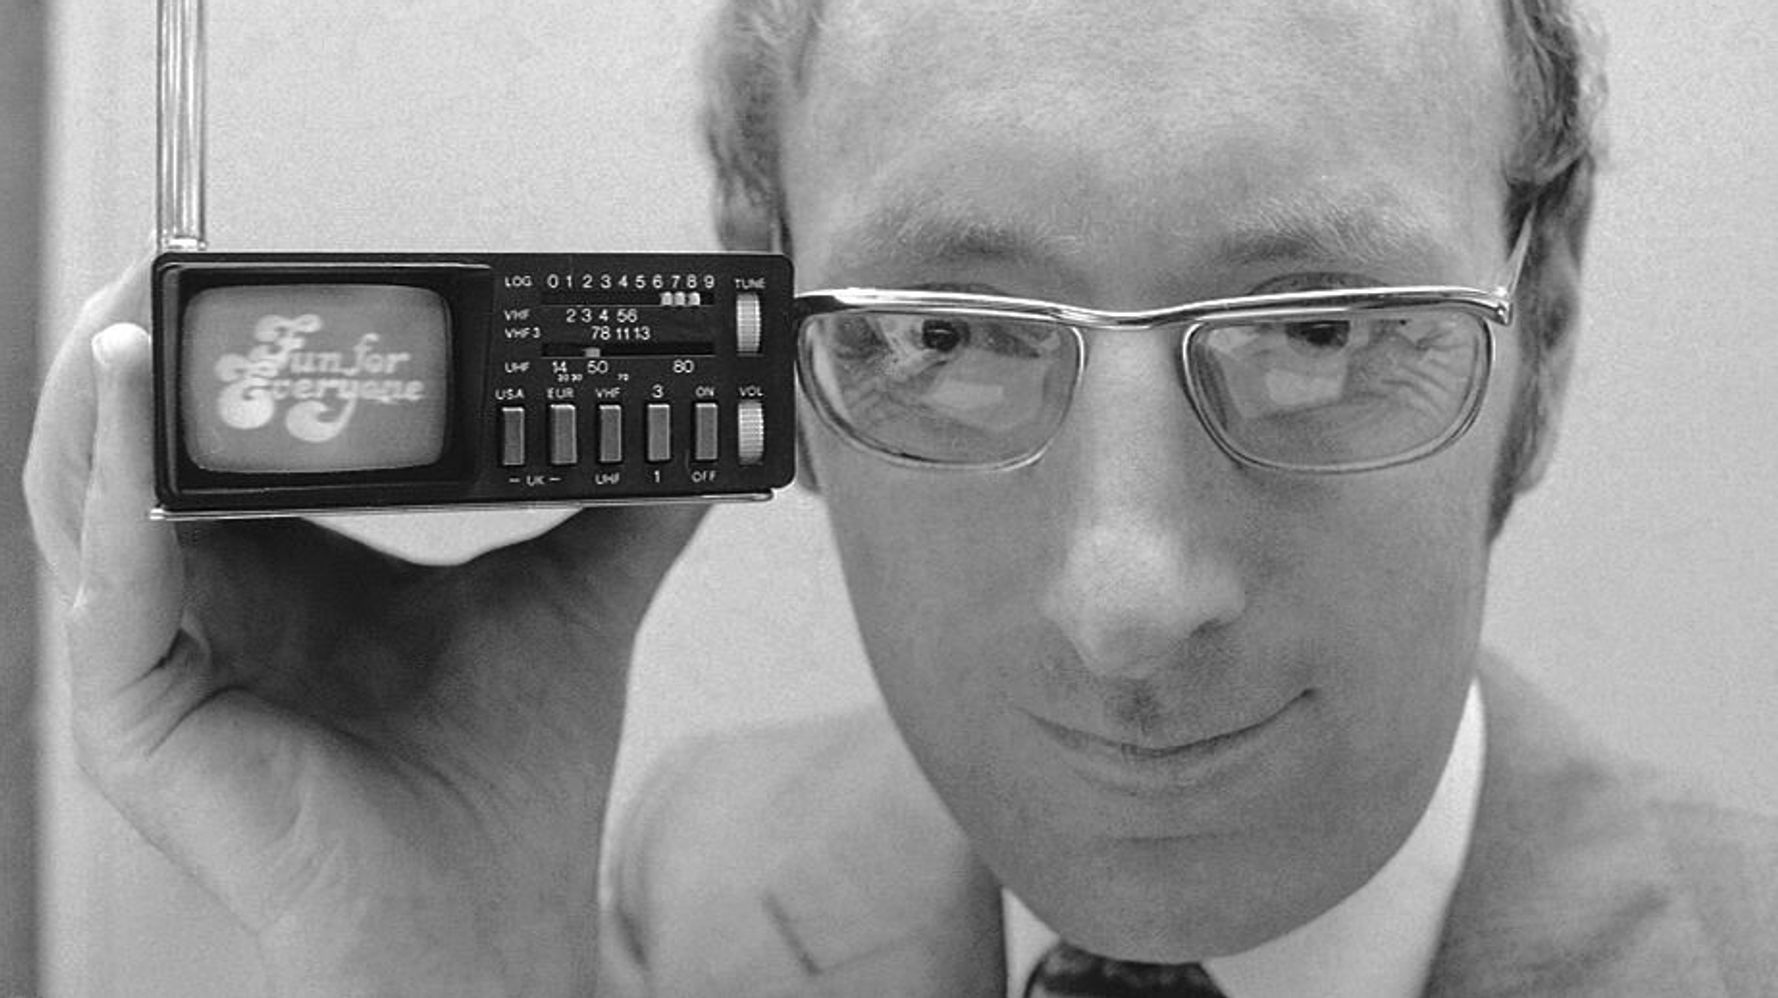 Clive Sinclair, Home Computing Pioneer, Dead At 81